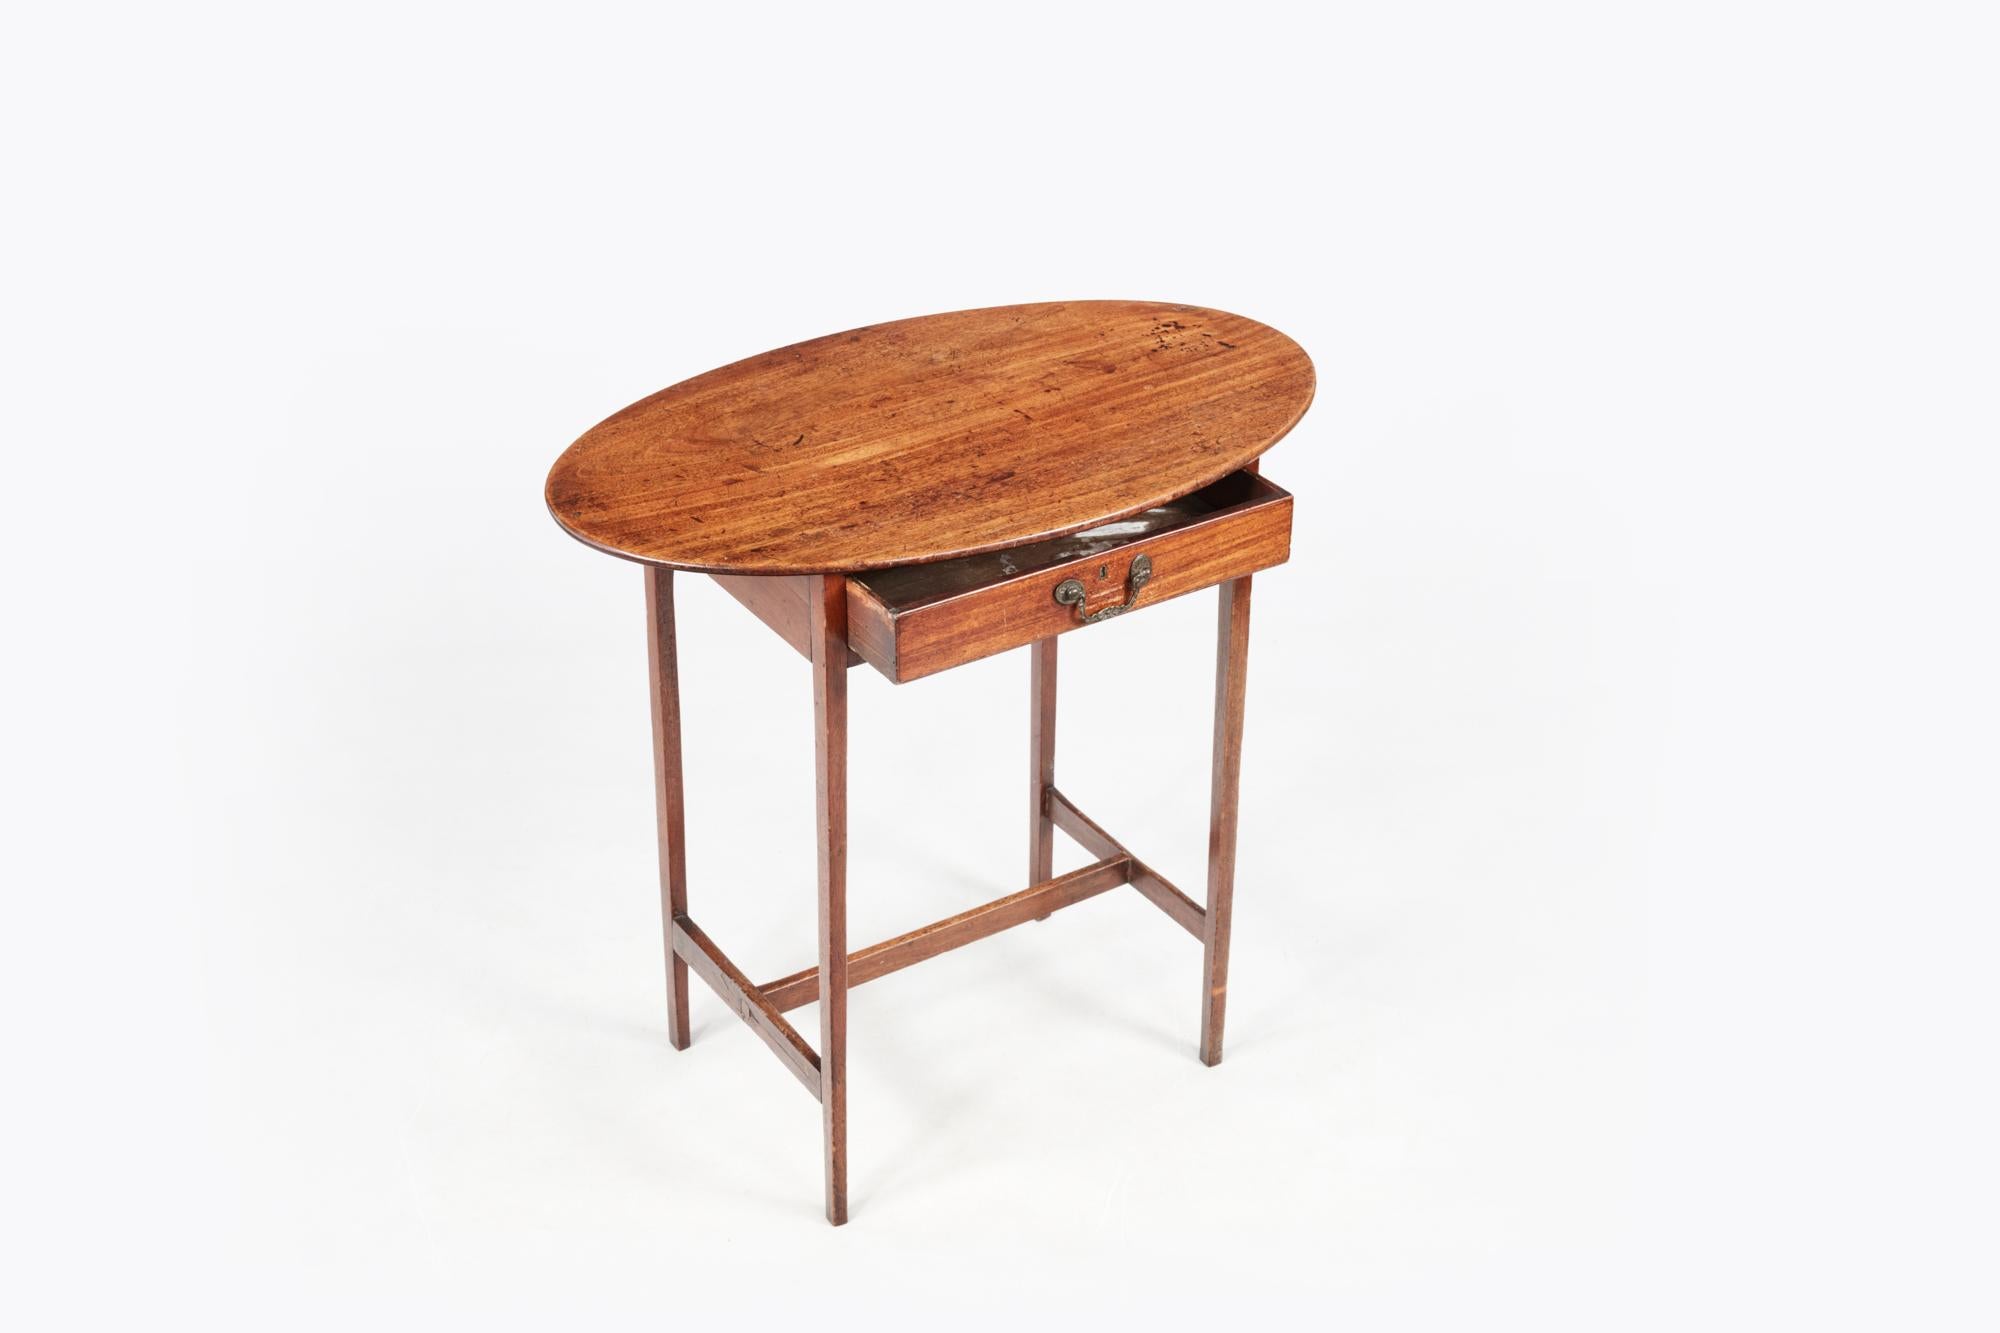 Early 19th century mahogany oval-topped occasional table, complete with single drawer featuring brass lock and swan neck handle, sitting above gently tapered legs supported by a simple stretcher.